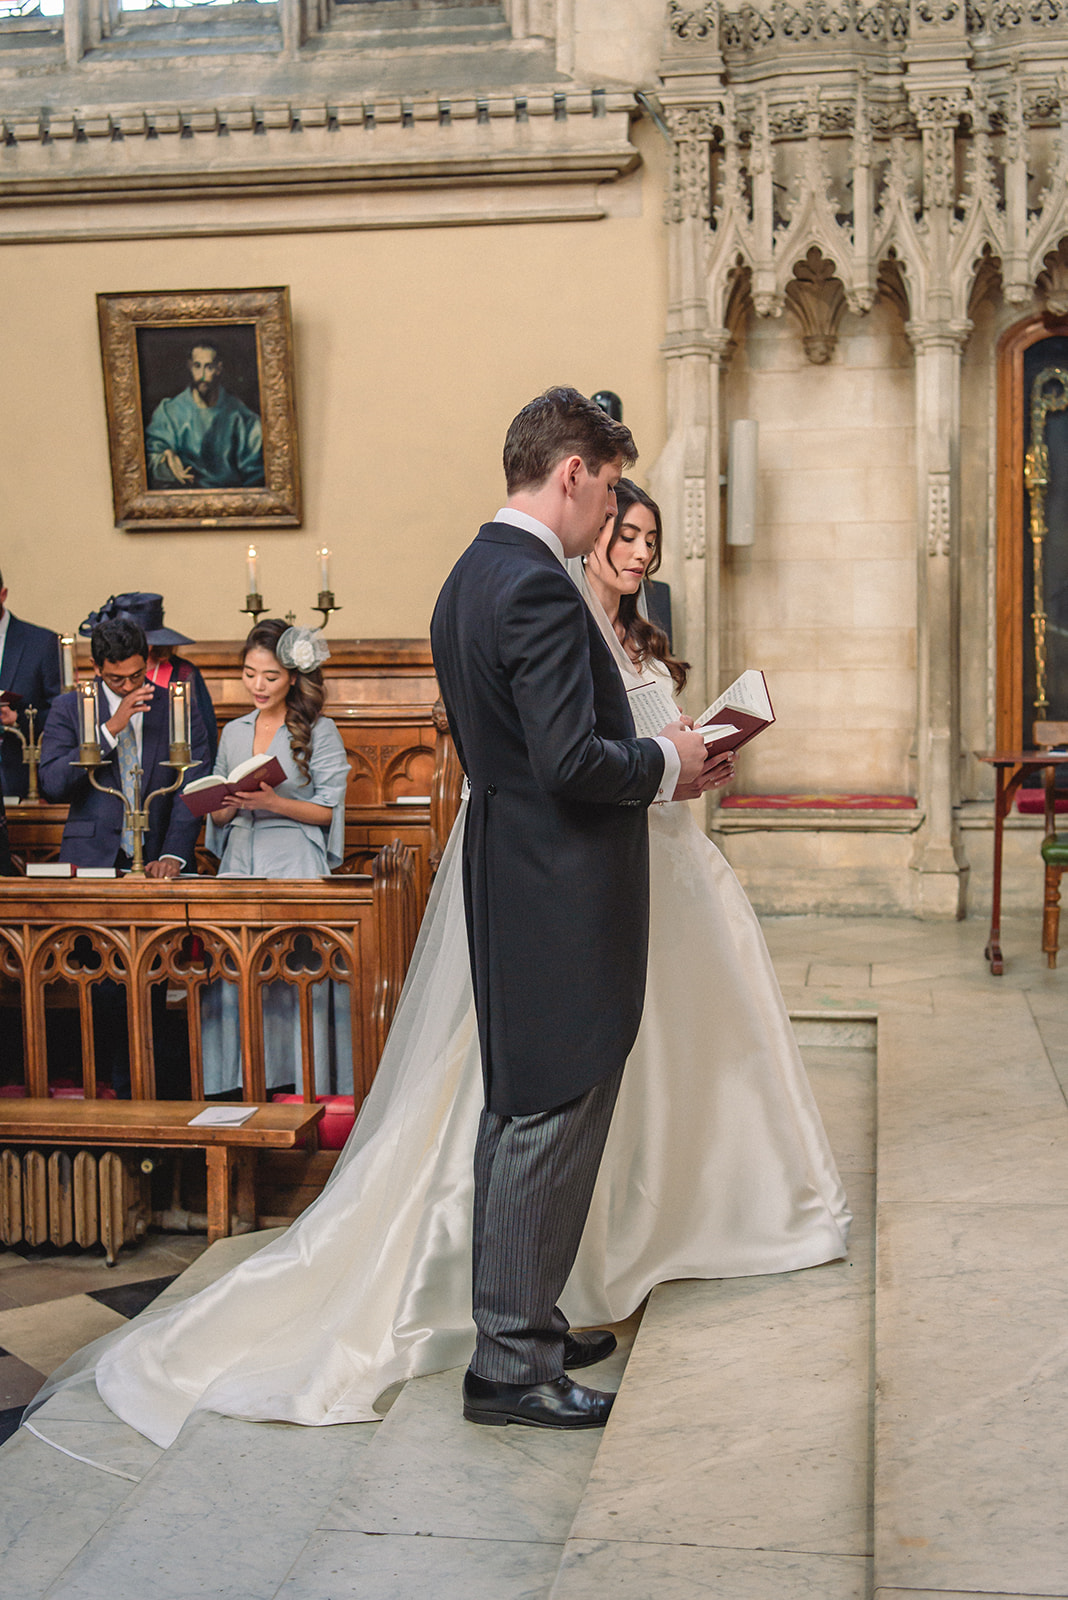 Katherine and Damien's wedding ceremony at the New College Chapel